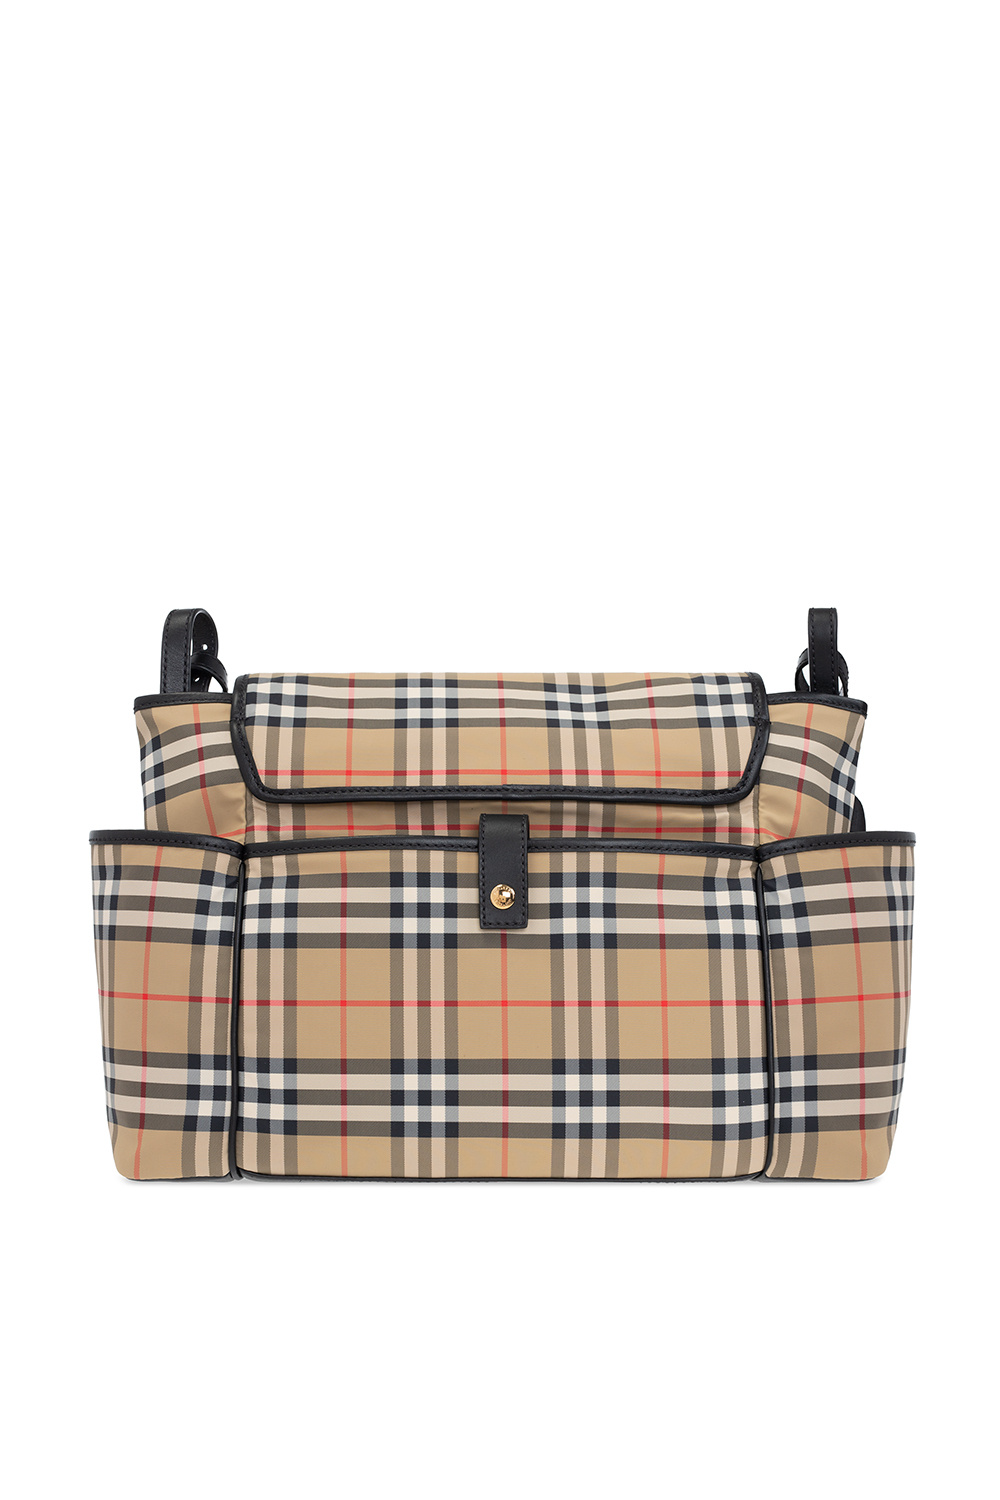 Burberry Kids Changing bag with logo